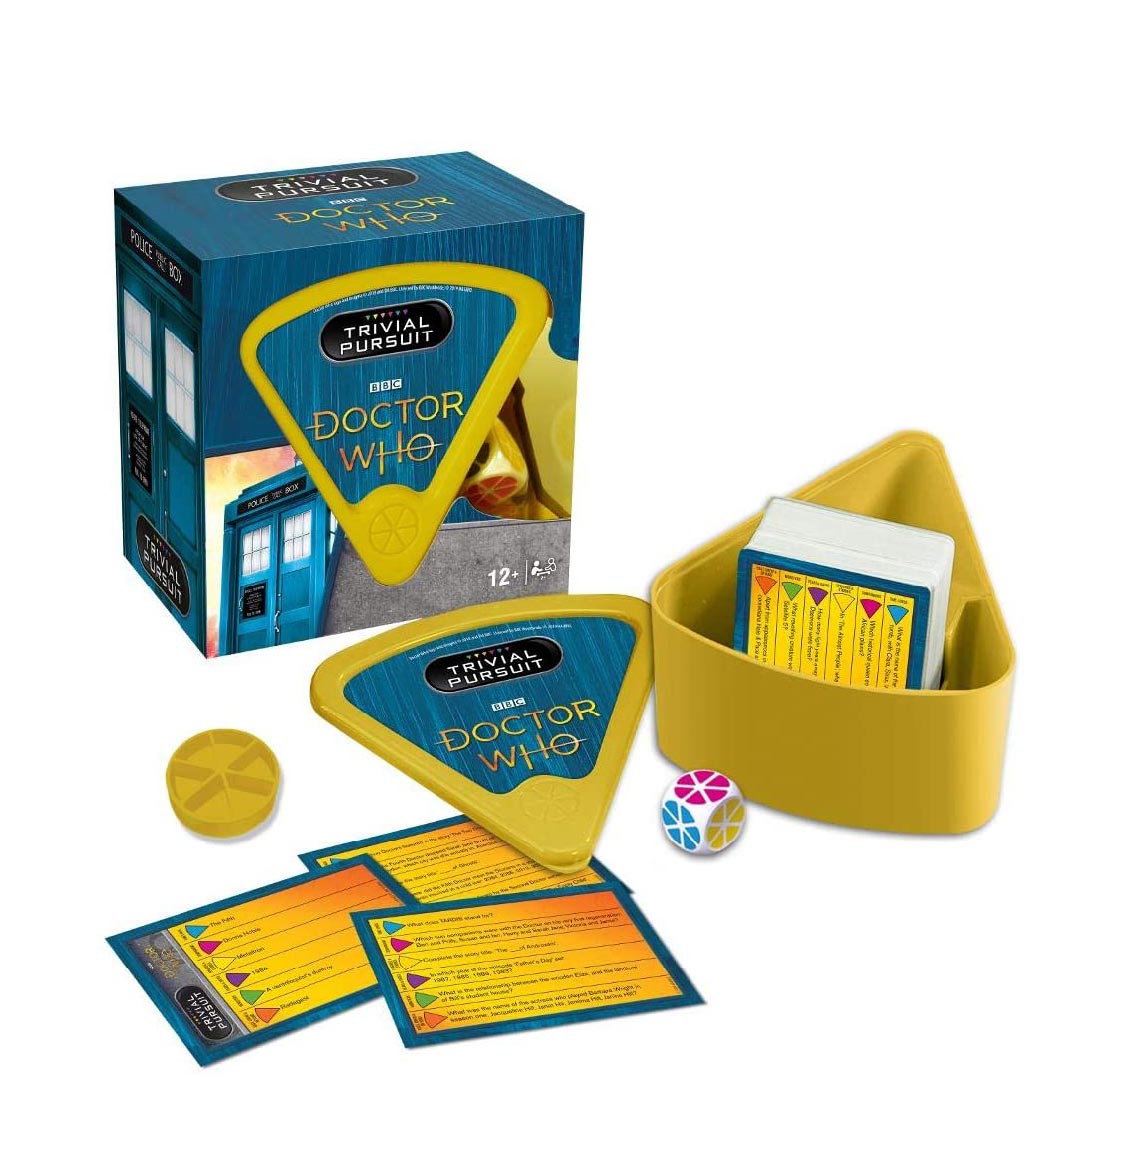 Trivial Pursuit Dr. Who Bitesize Winning Moves English Edition